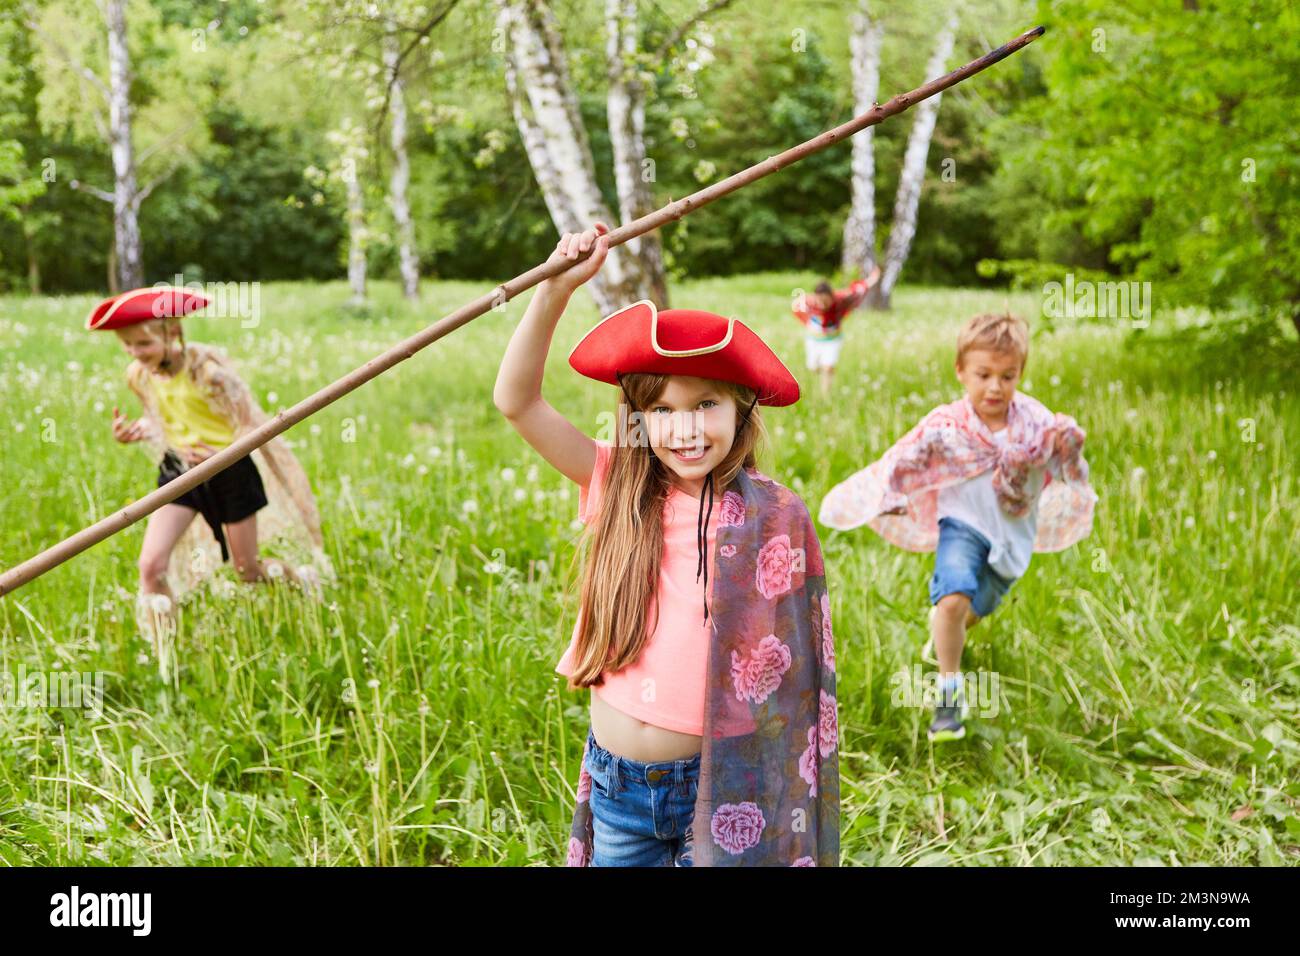 Portrait of smiling girl with tricorn hat and stick standing in grass by friends at park Stock Photo